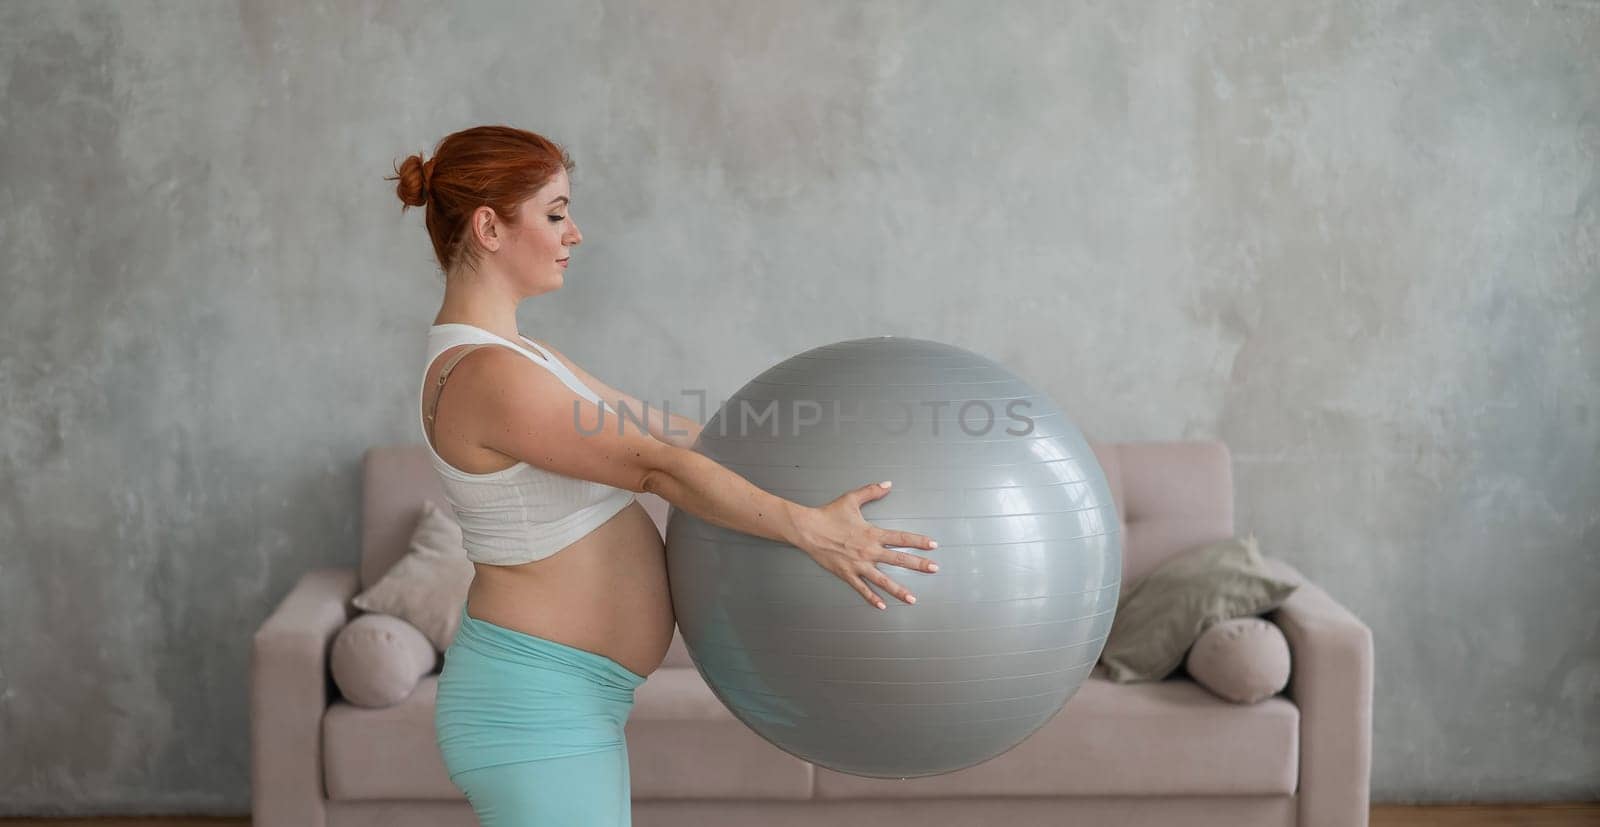 Pregnant red-haired woman doing arm exercises with fitball at home